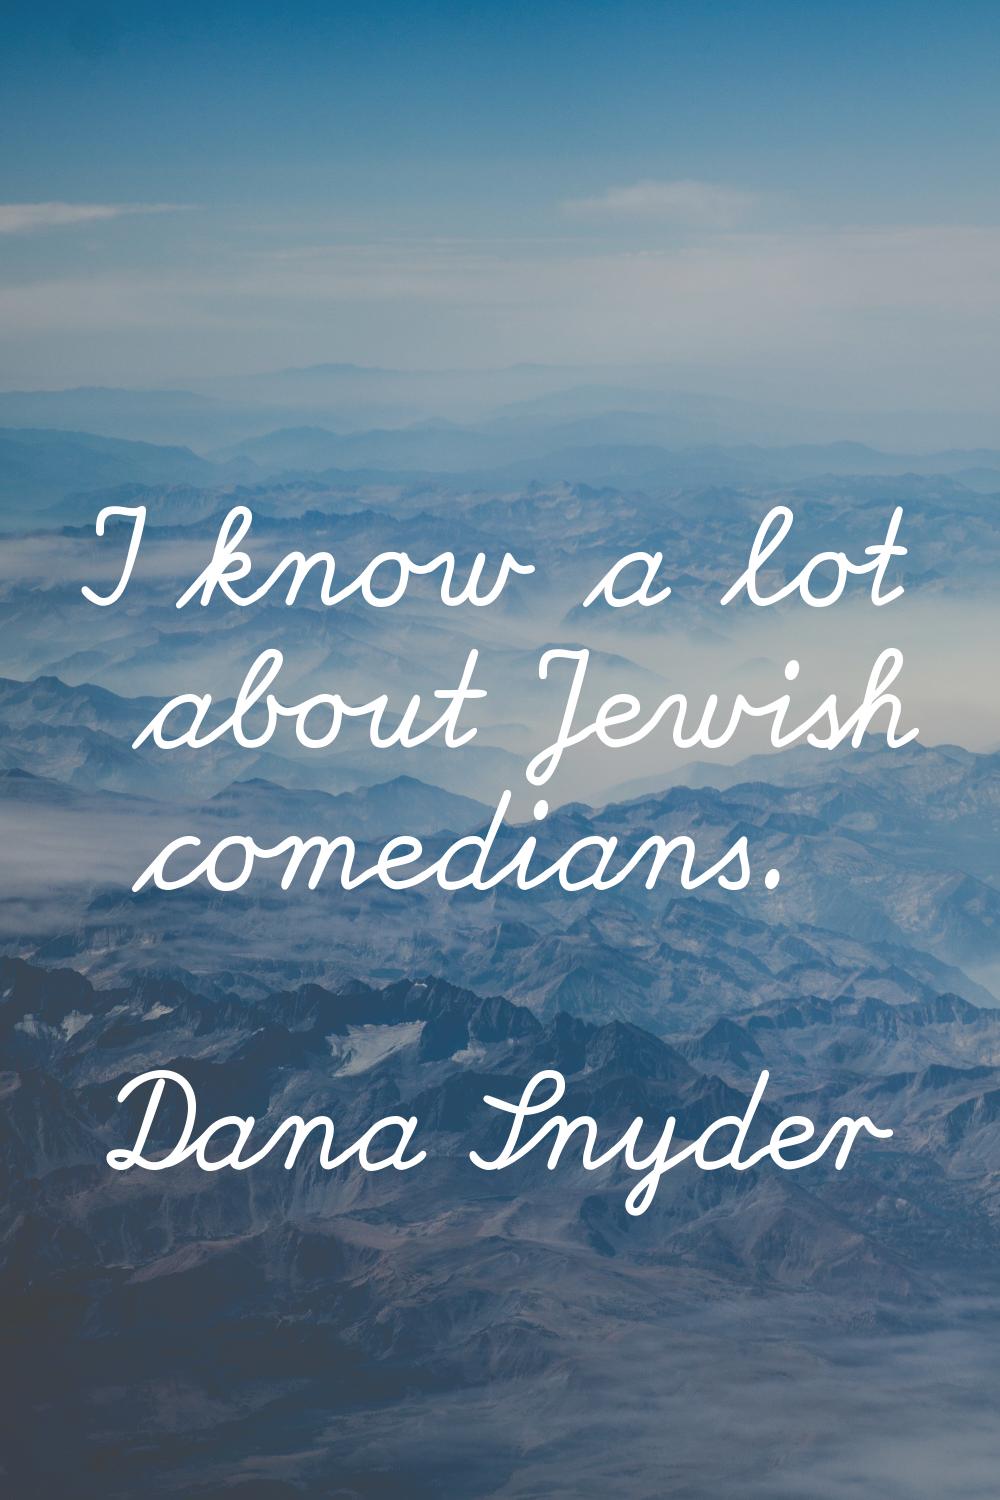 I know a lot about Jewish comedians.